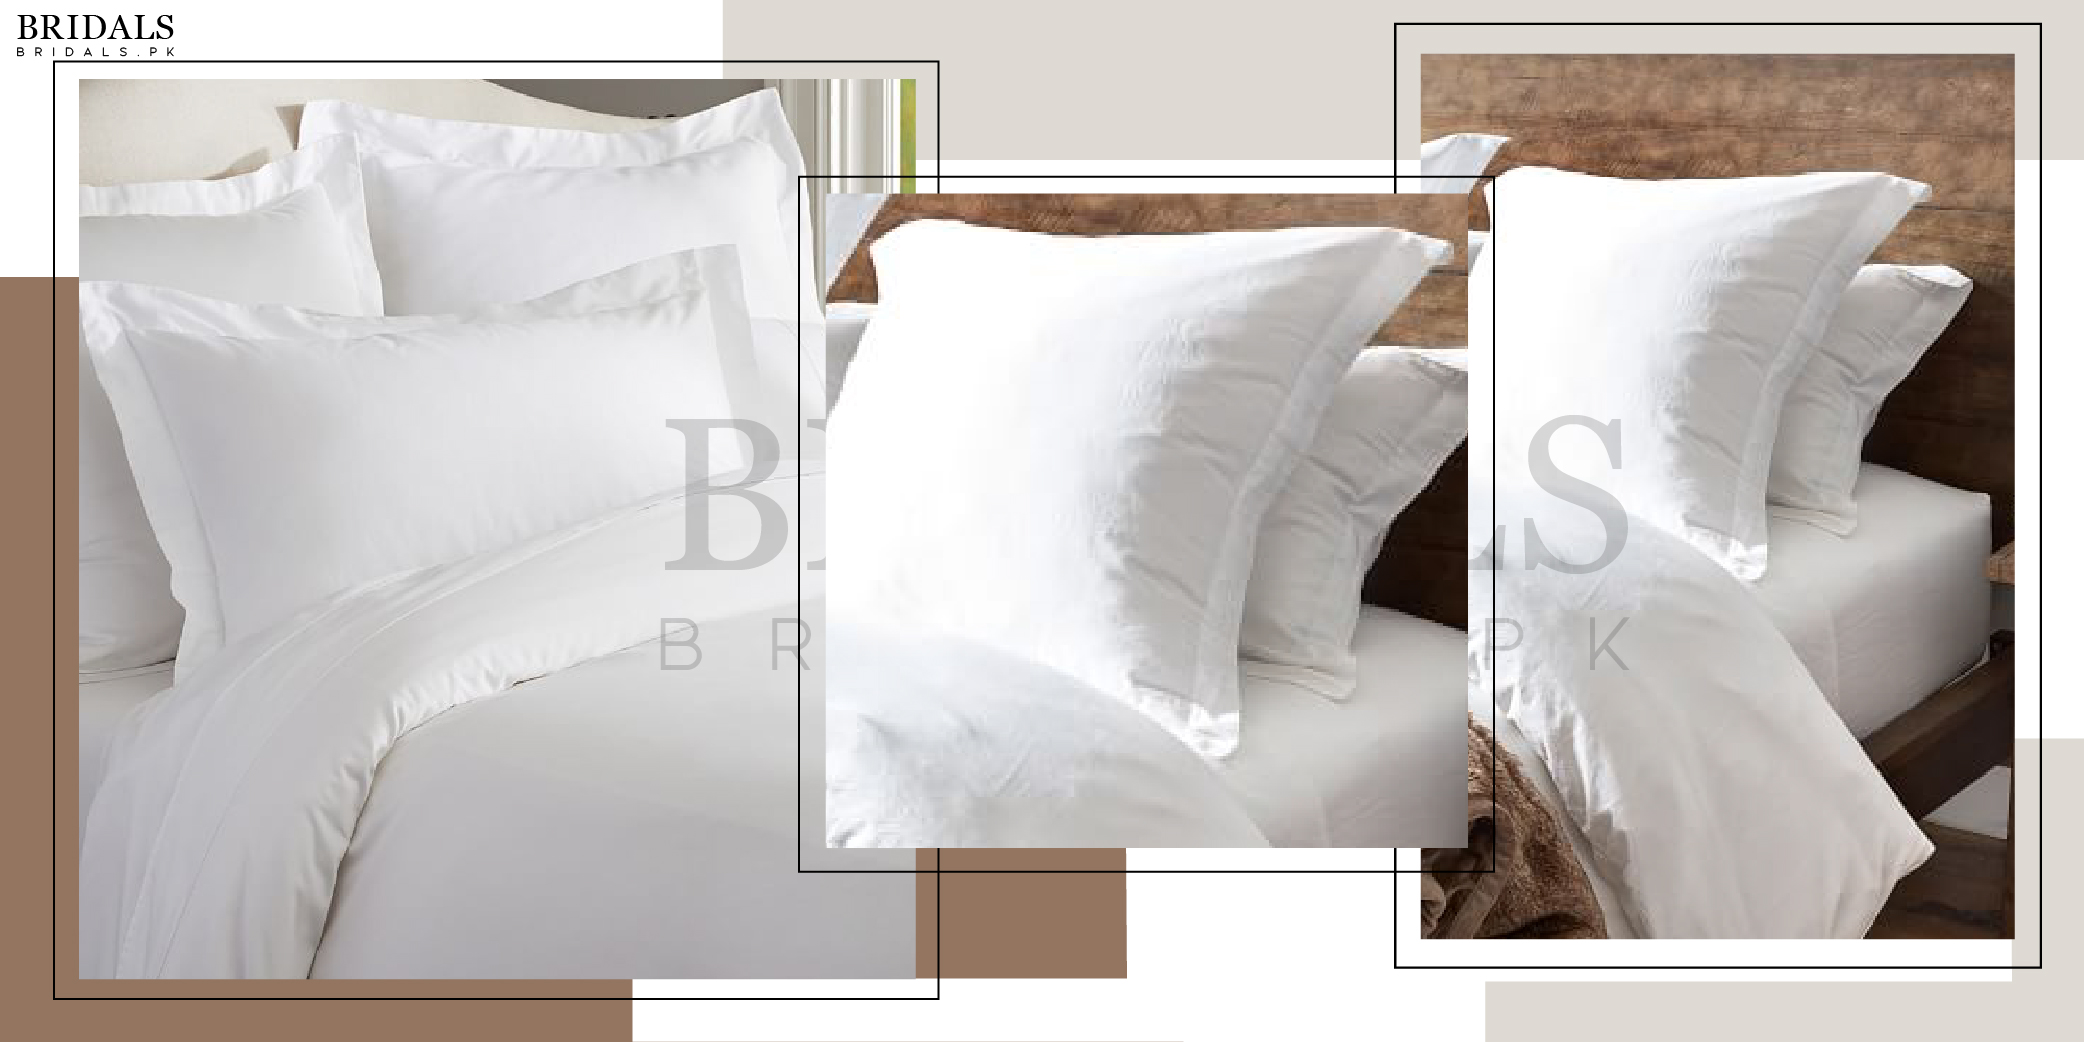 Pottery Barn S Cotton Bedding That Will Make You Have Coffee In Bed